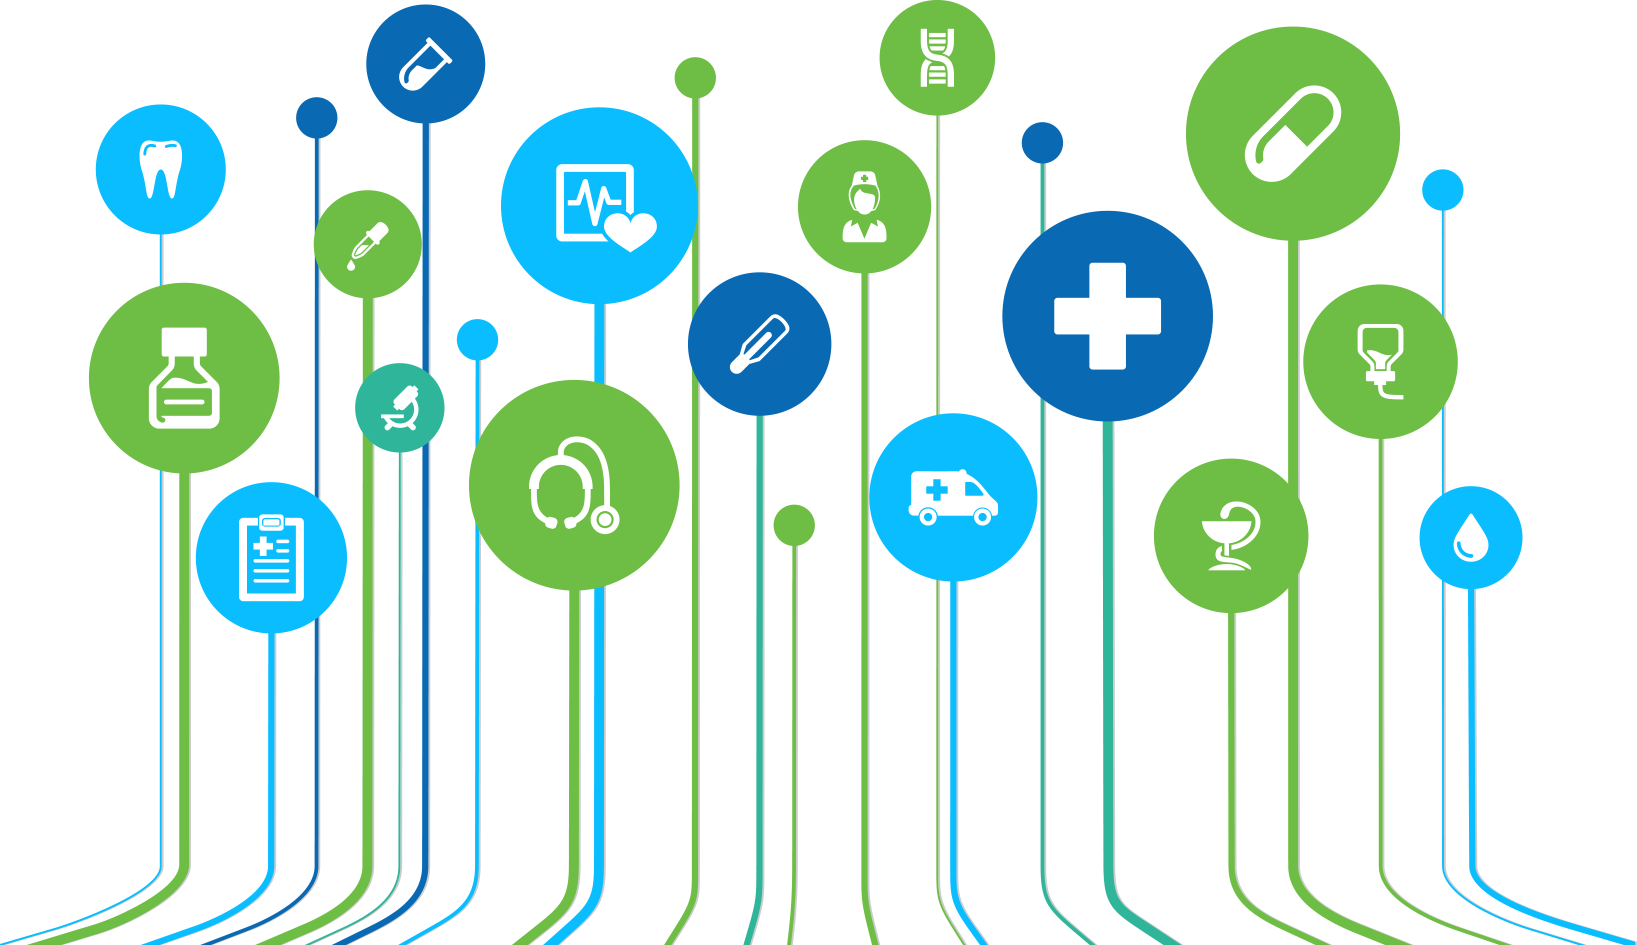 Abstract graphic element representing medical services with icons of various medical services.